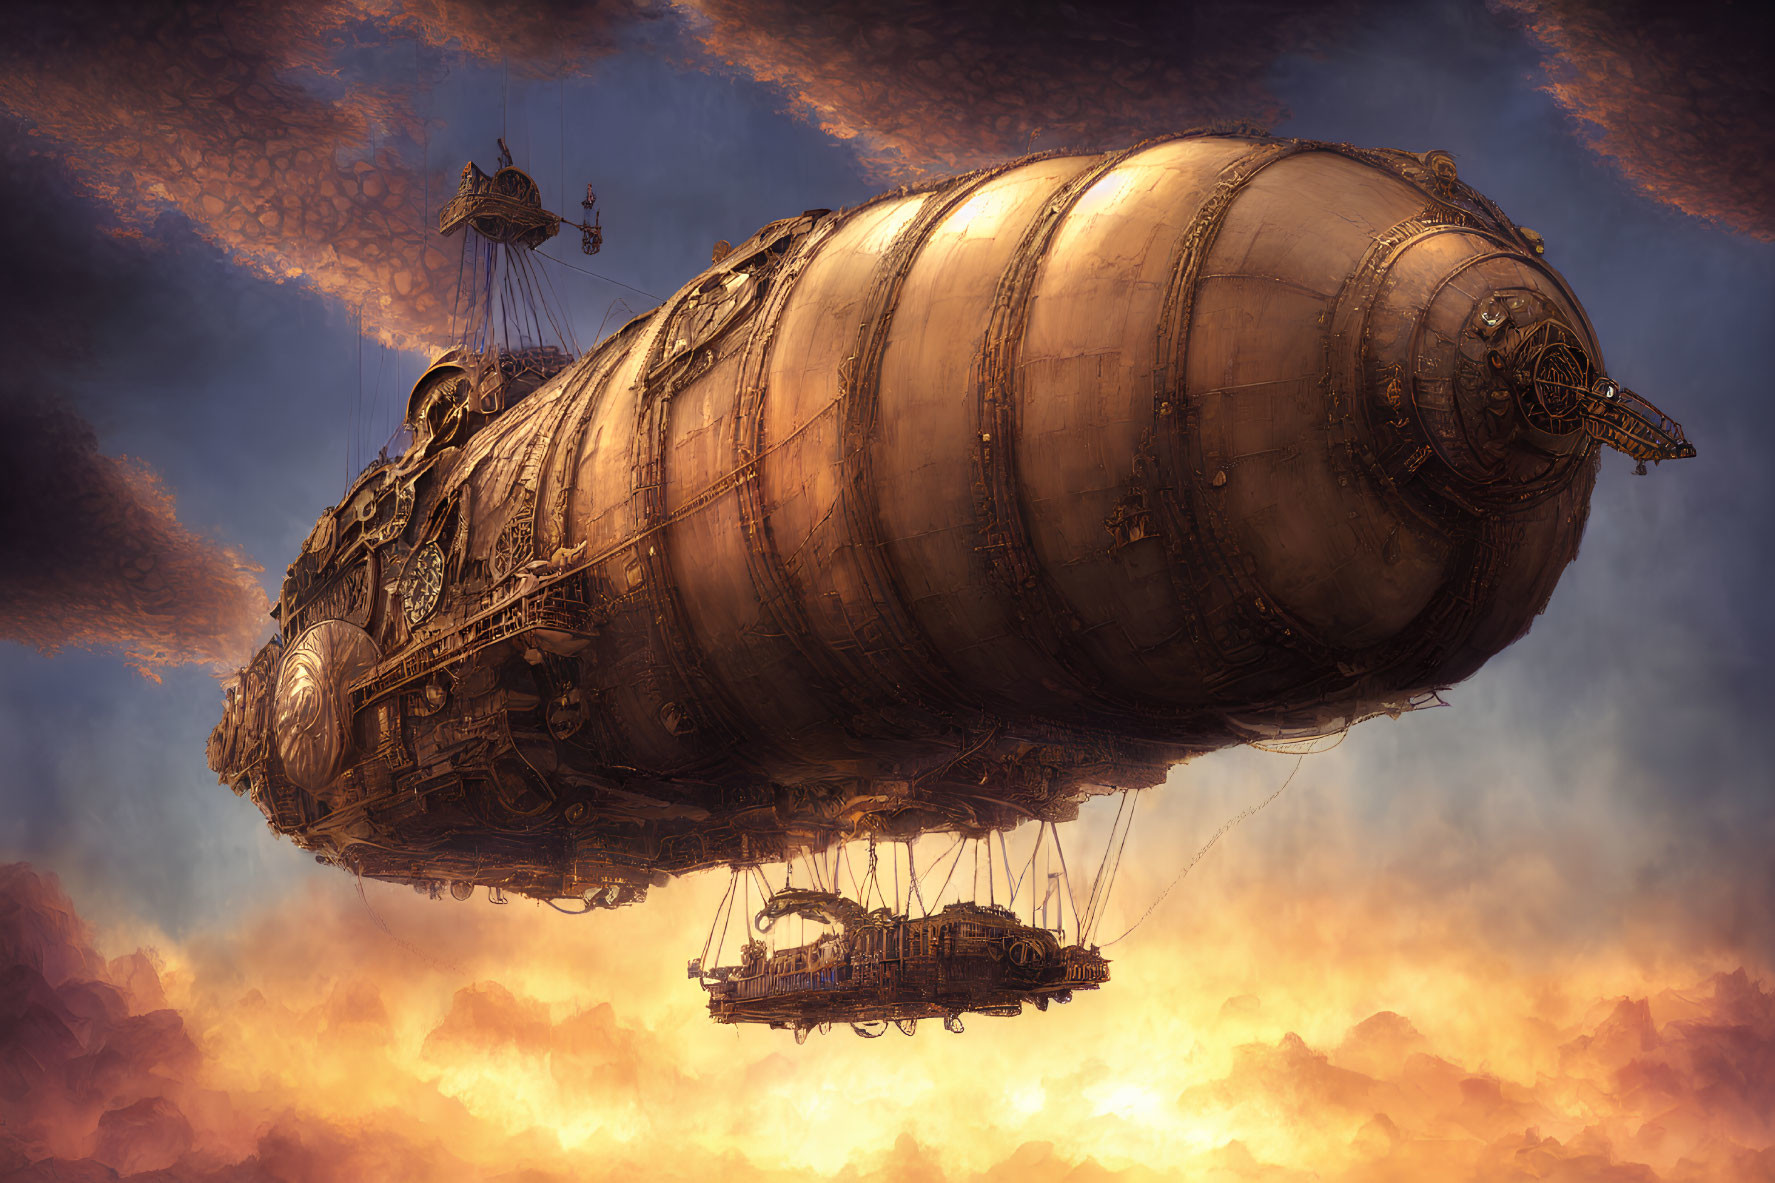 Steampunk-style airship with intricate metalwork in golden cloud-filled sky